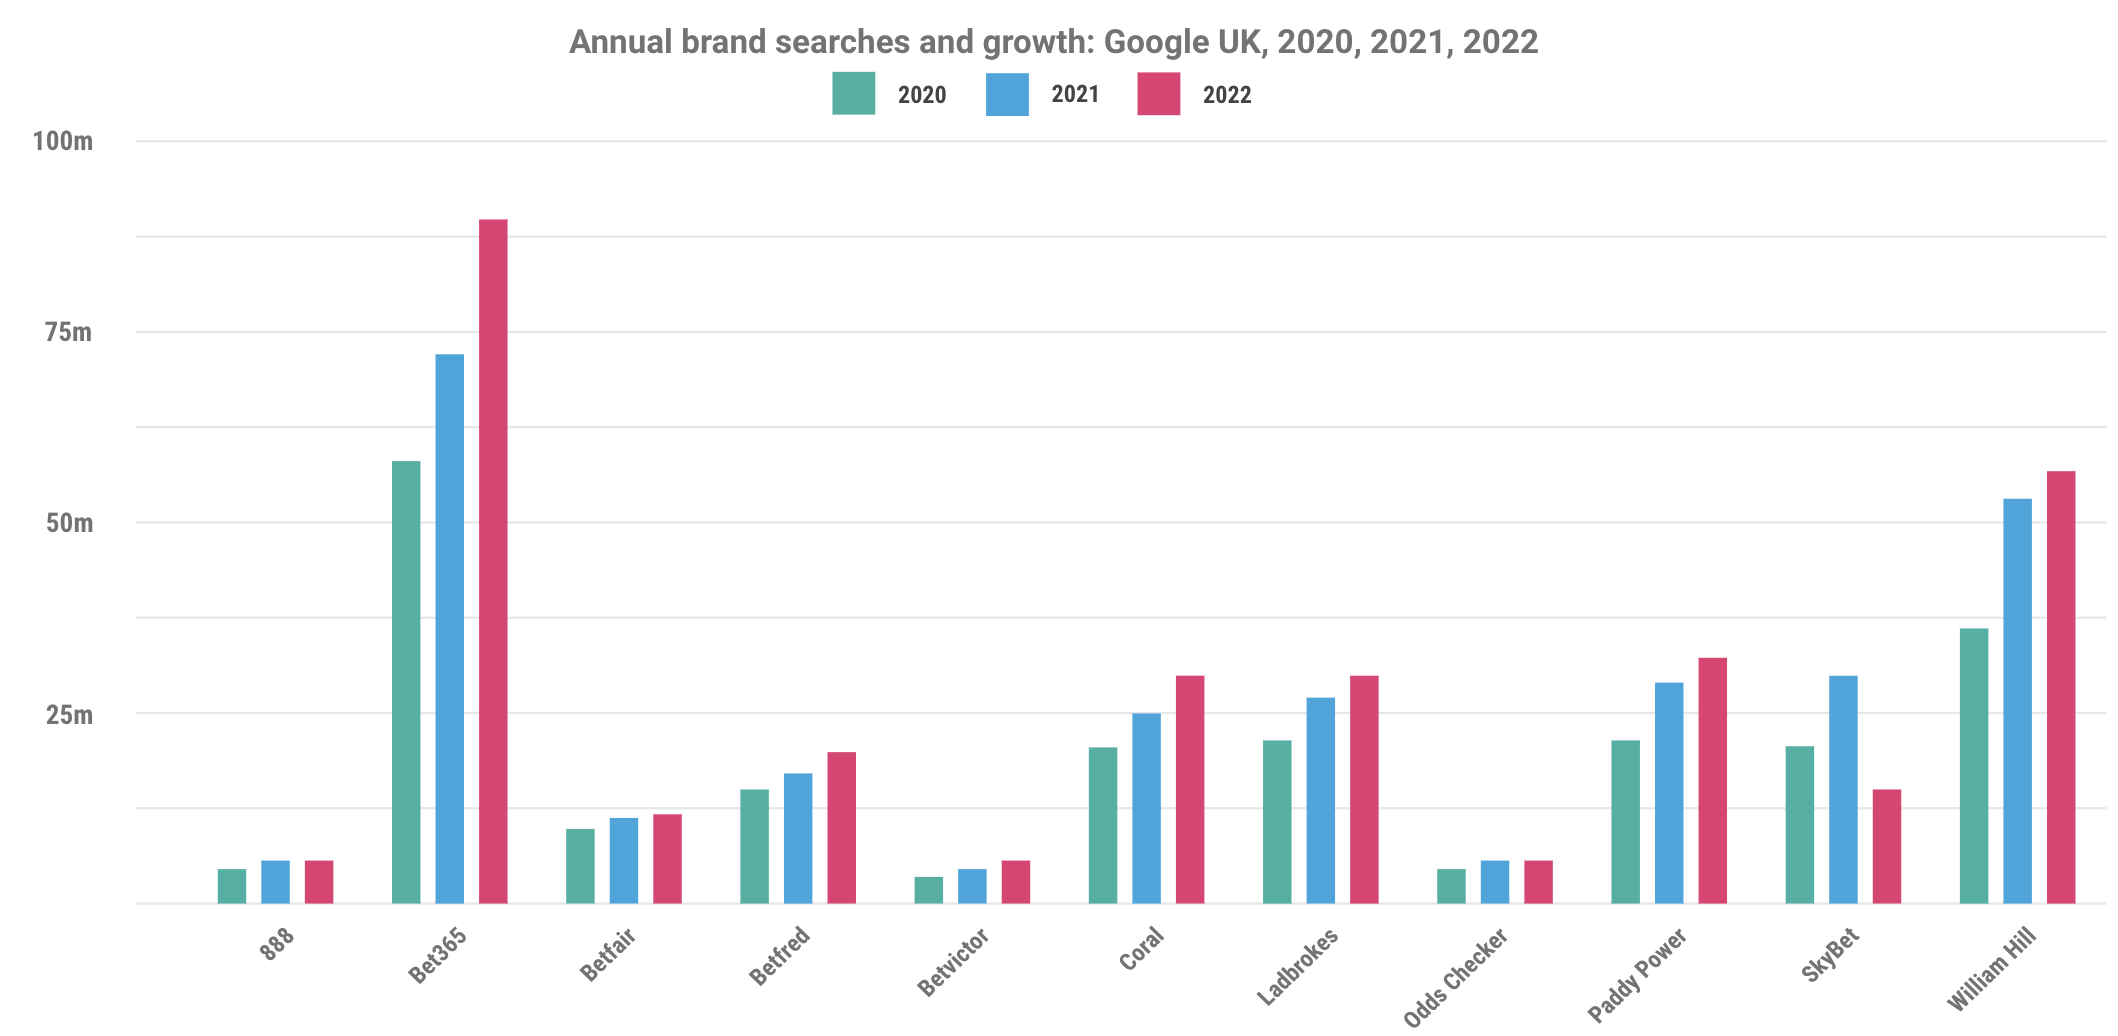 Annual brand searches and growth Google UK, 2020, 2021, 2022